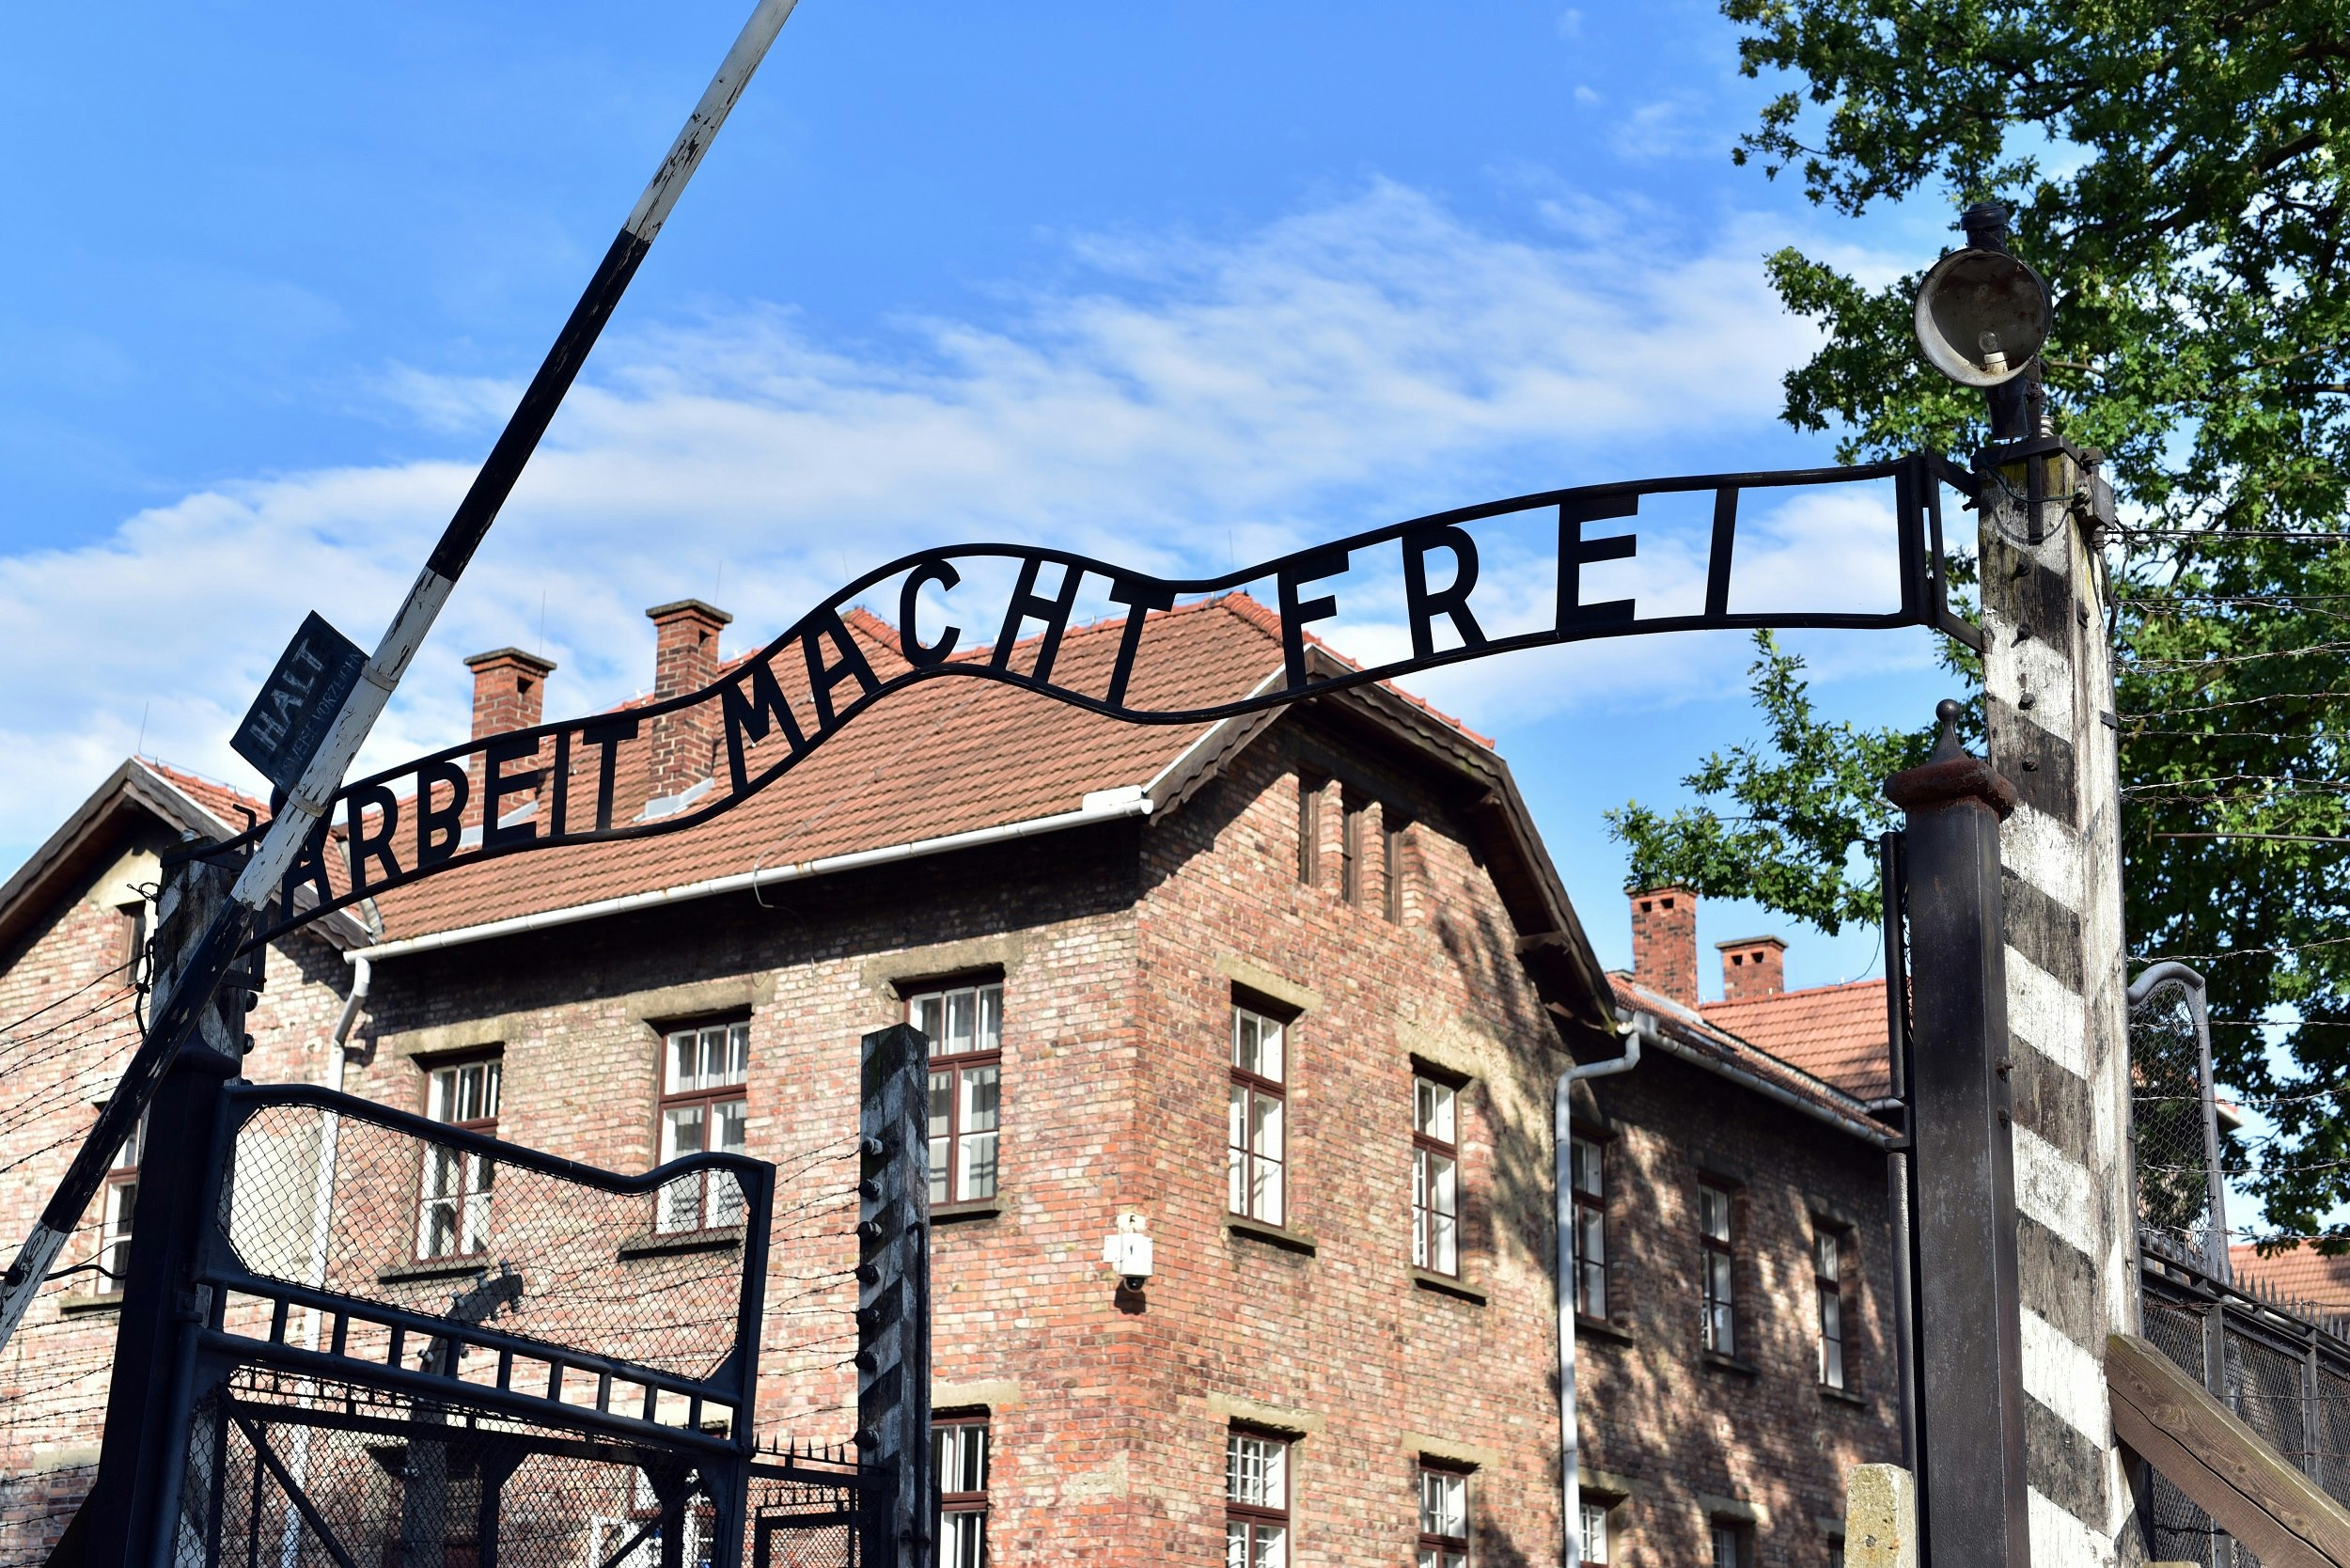 A gateway with writing in wrought-iron above it saying "Arbeit Macht Frei" which translates to "Work will make you free".